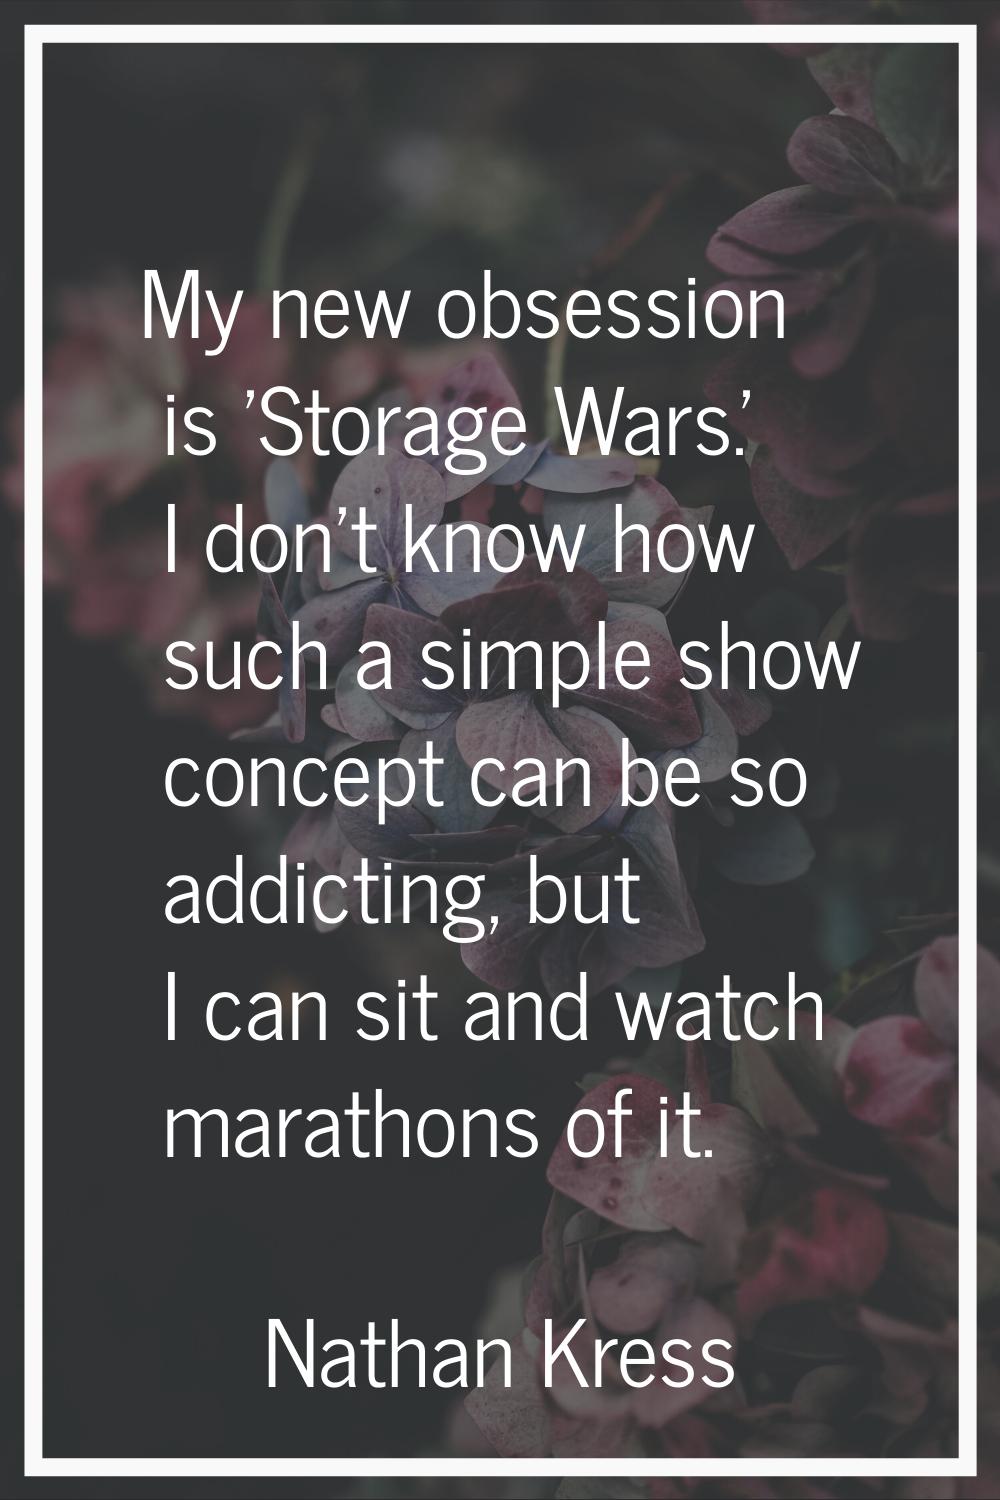 My new obsession is 'Storage Wars.' I don't know how such a simple show concept can be so addicting